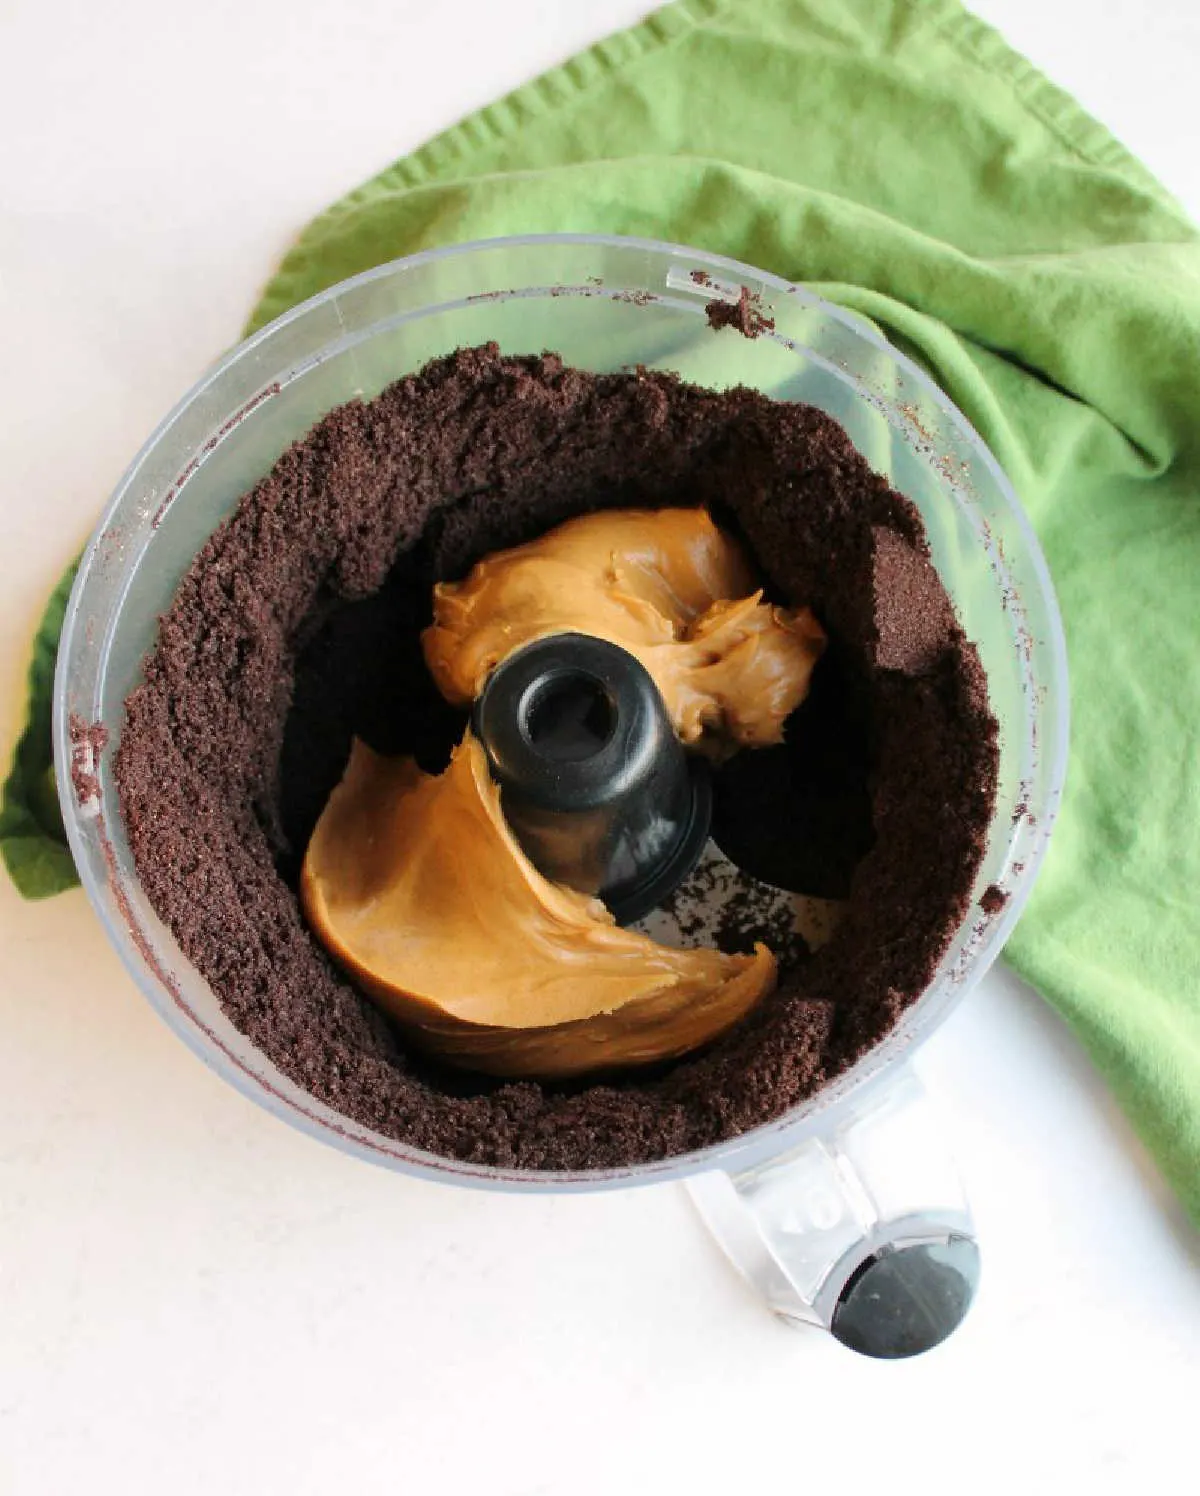 cookie crumbs and peanut butter in food processor.